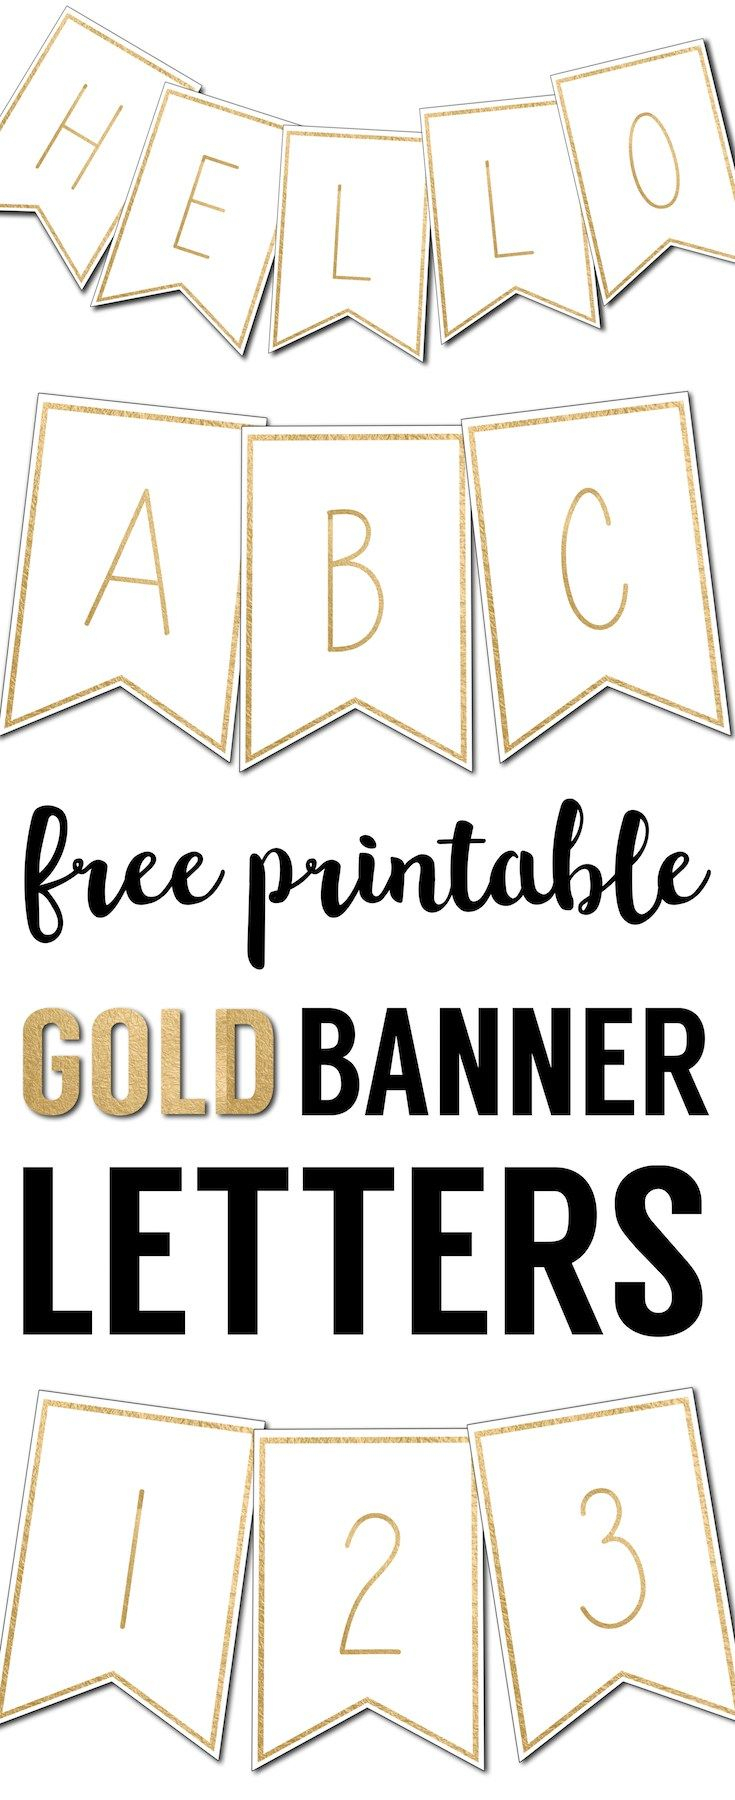 Free Printable Banner Letters Templates | Free Printable Intended For Free Bridal Shower Banner Template